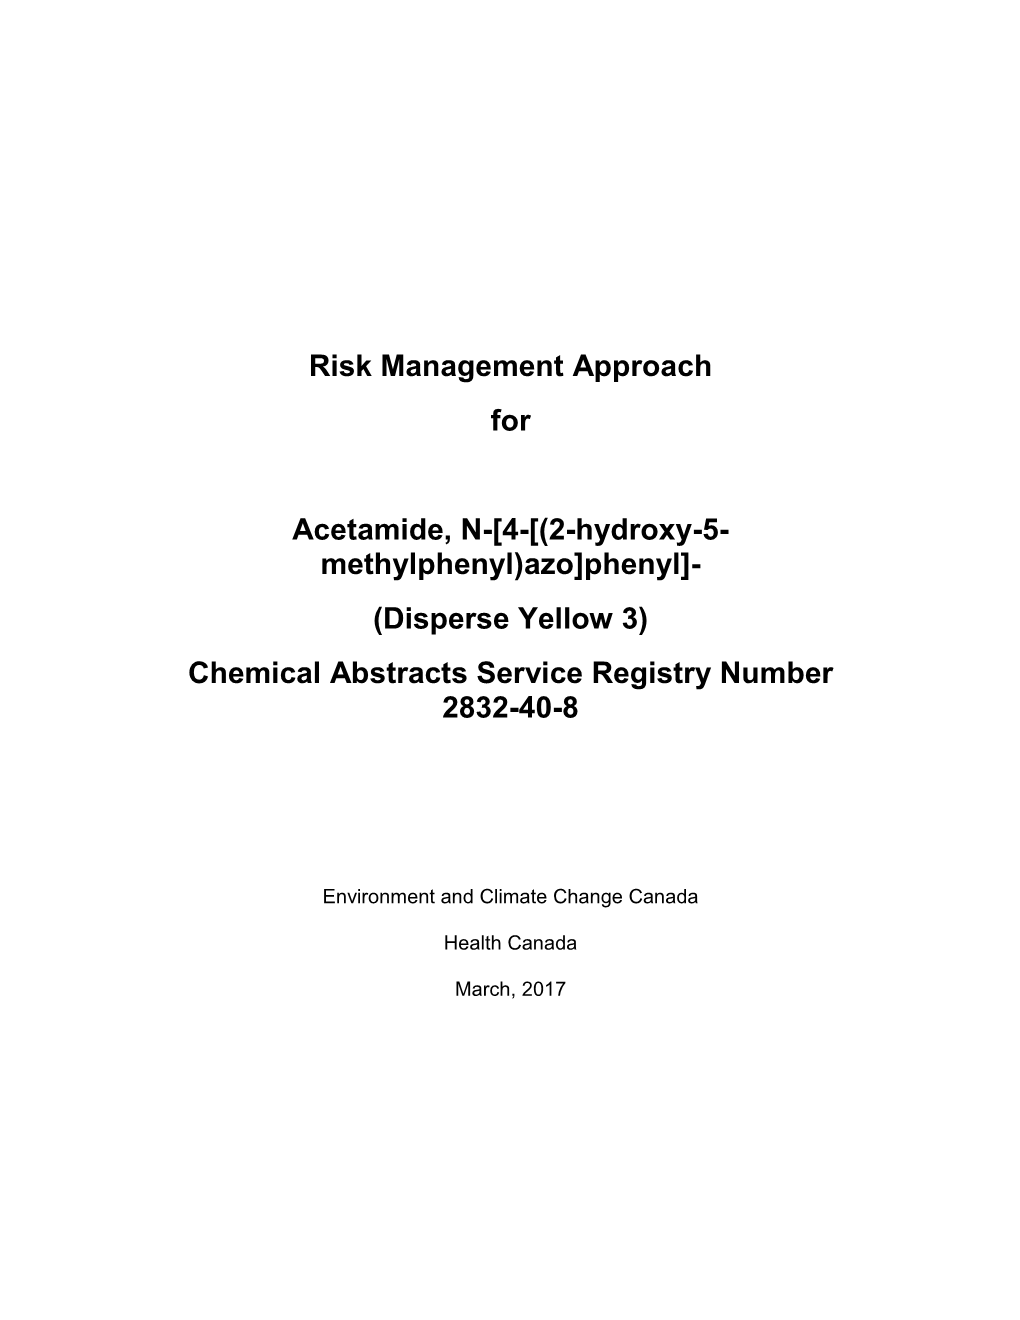 Risk Management Approach for Acetamide, N-[4-[(2-Hydroxy-5- Methylphenyl)Azo]Phenyl]- (Disperse Yellow 3) Chemical Abstracts Se